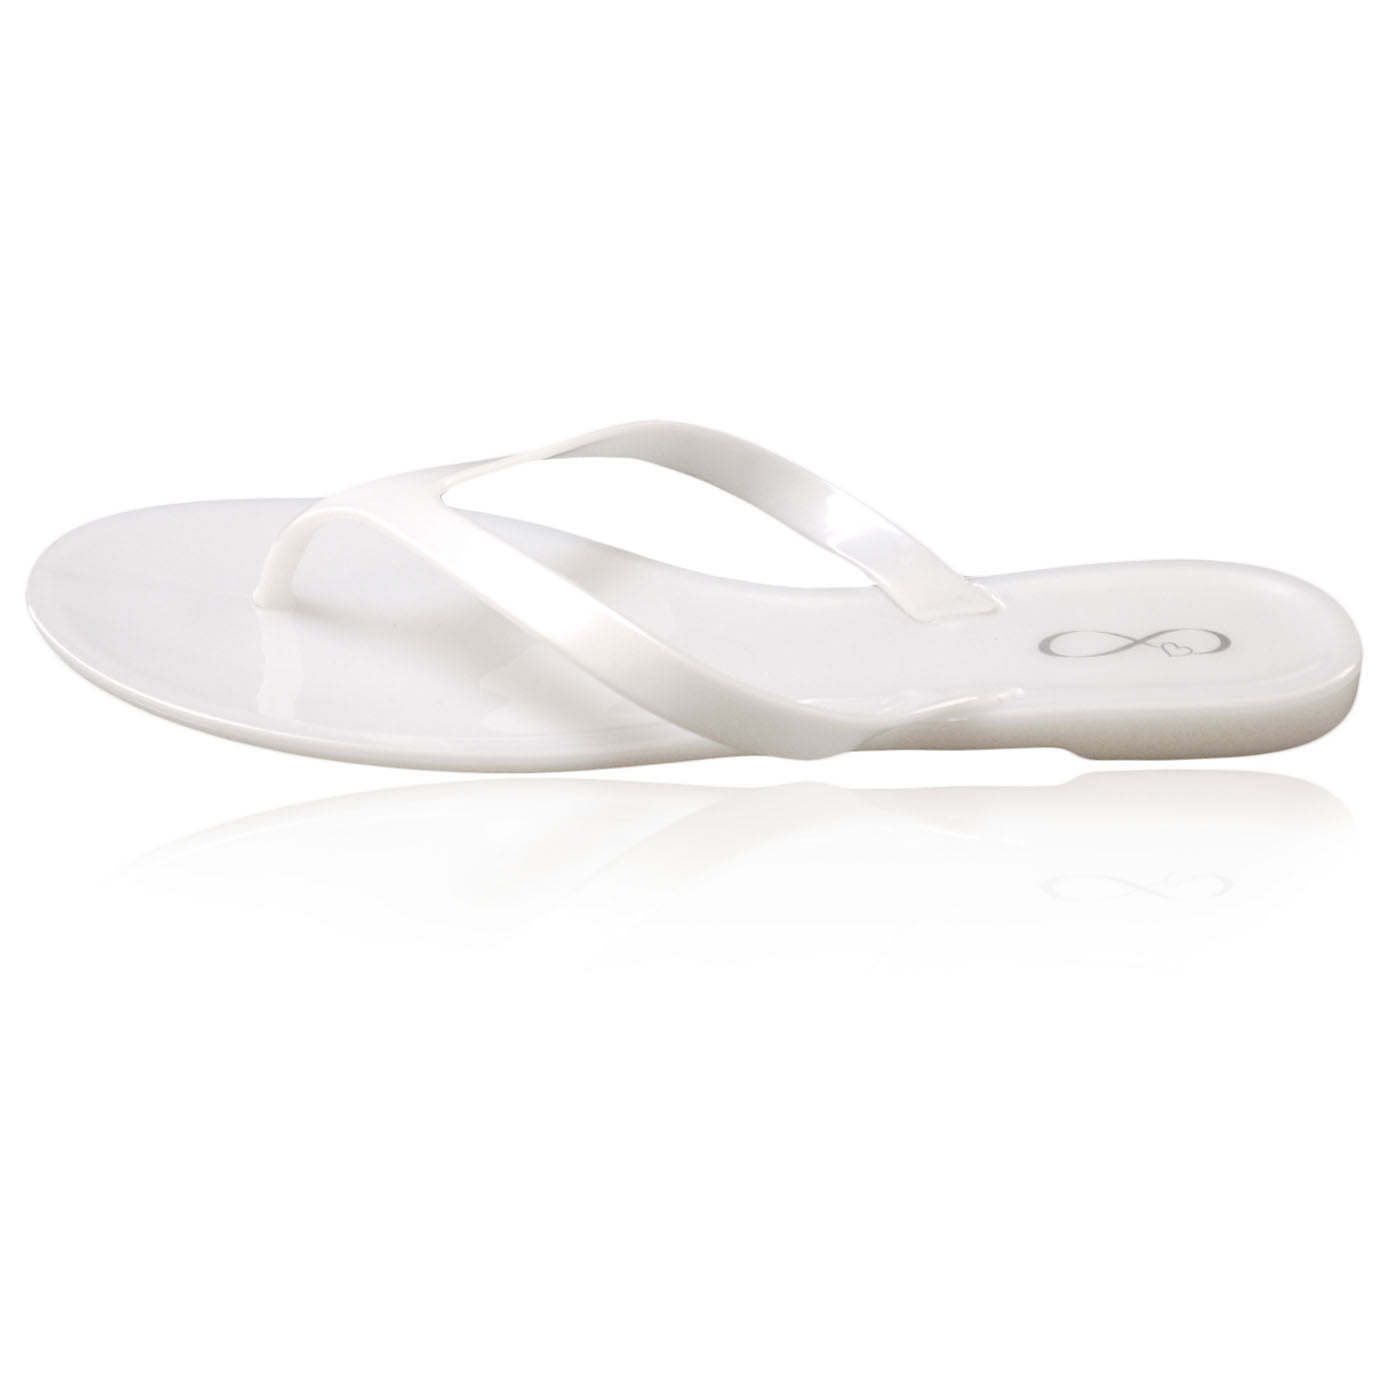 White pearl finish jelly flip flop